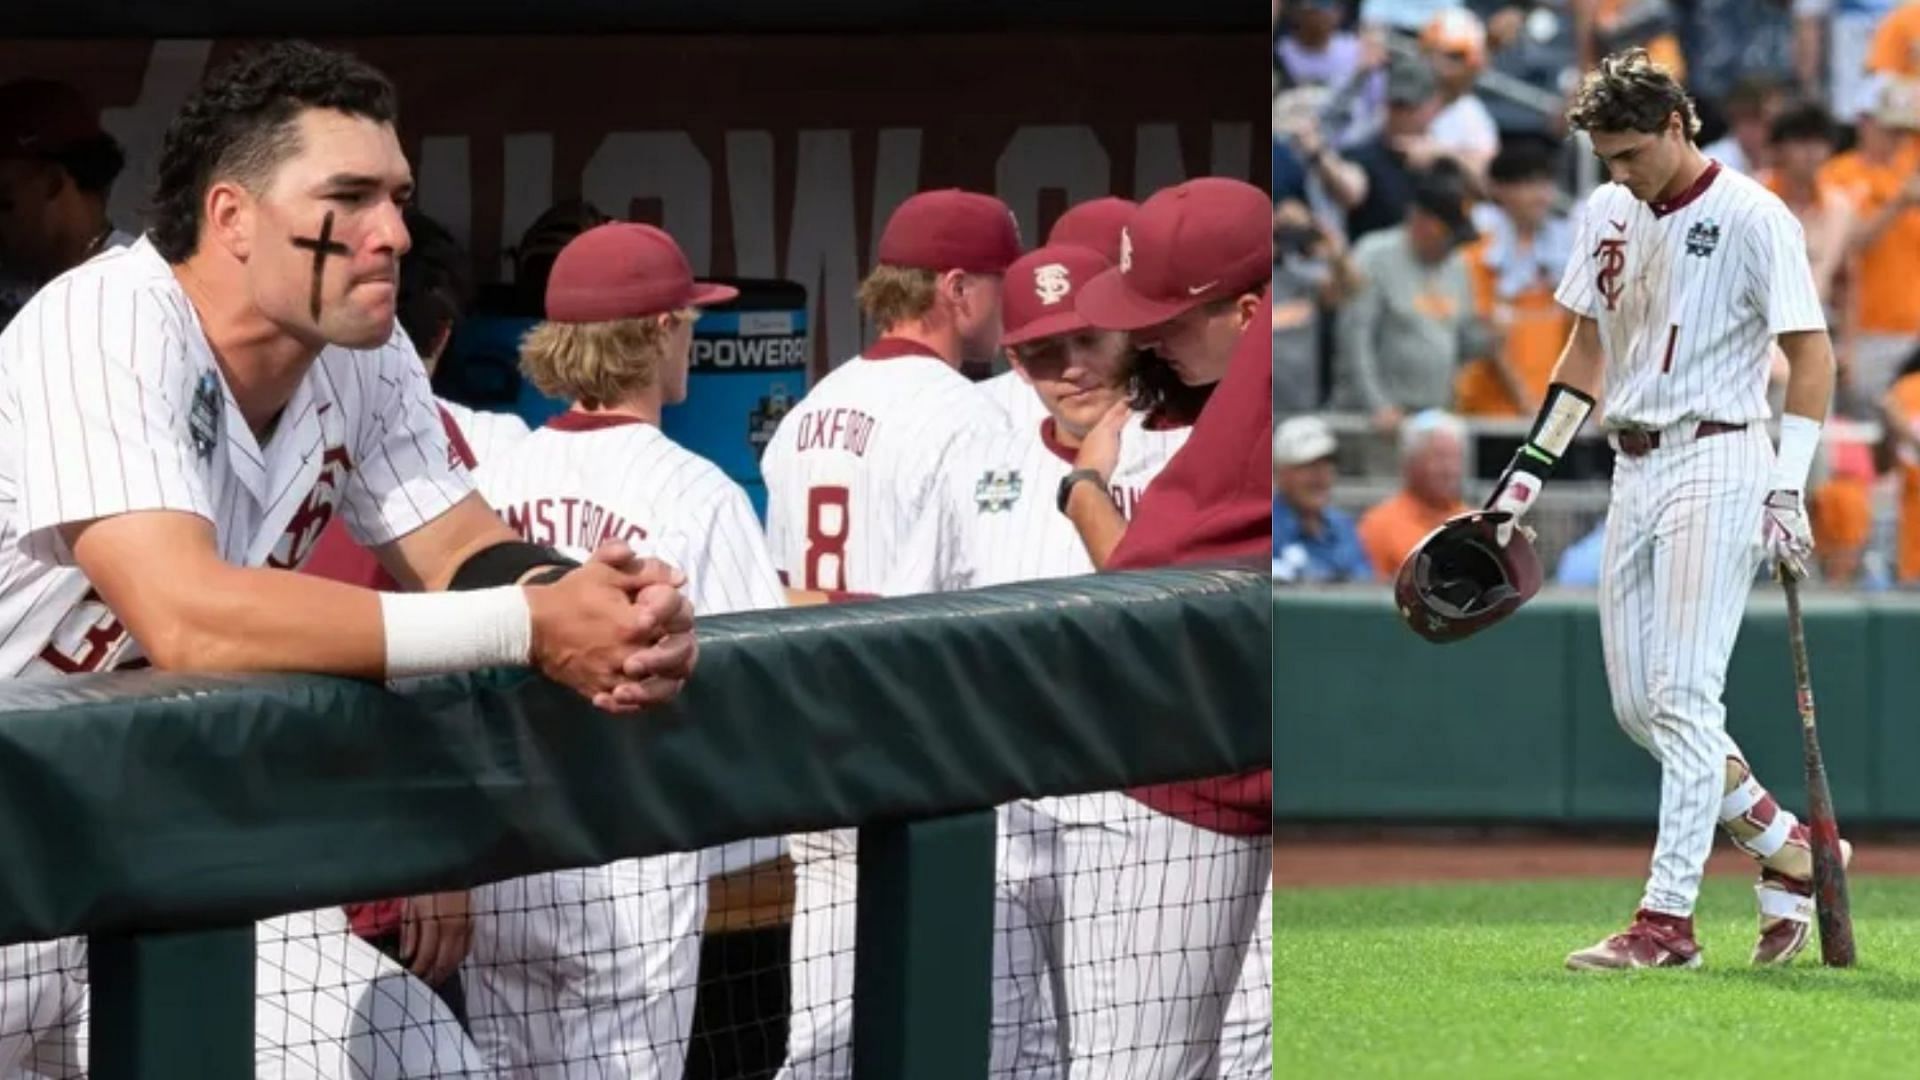 Florida State lost a chance to enter to the College World Series final as they got clobbered by Tennessee, 7-2, in the CWS semifinals.